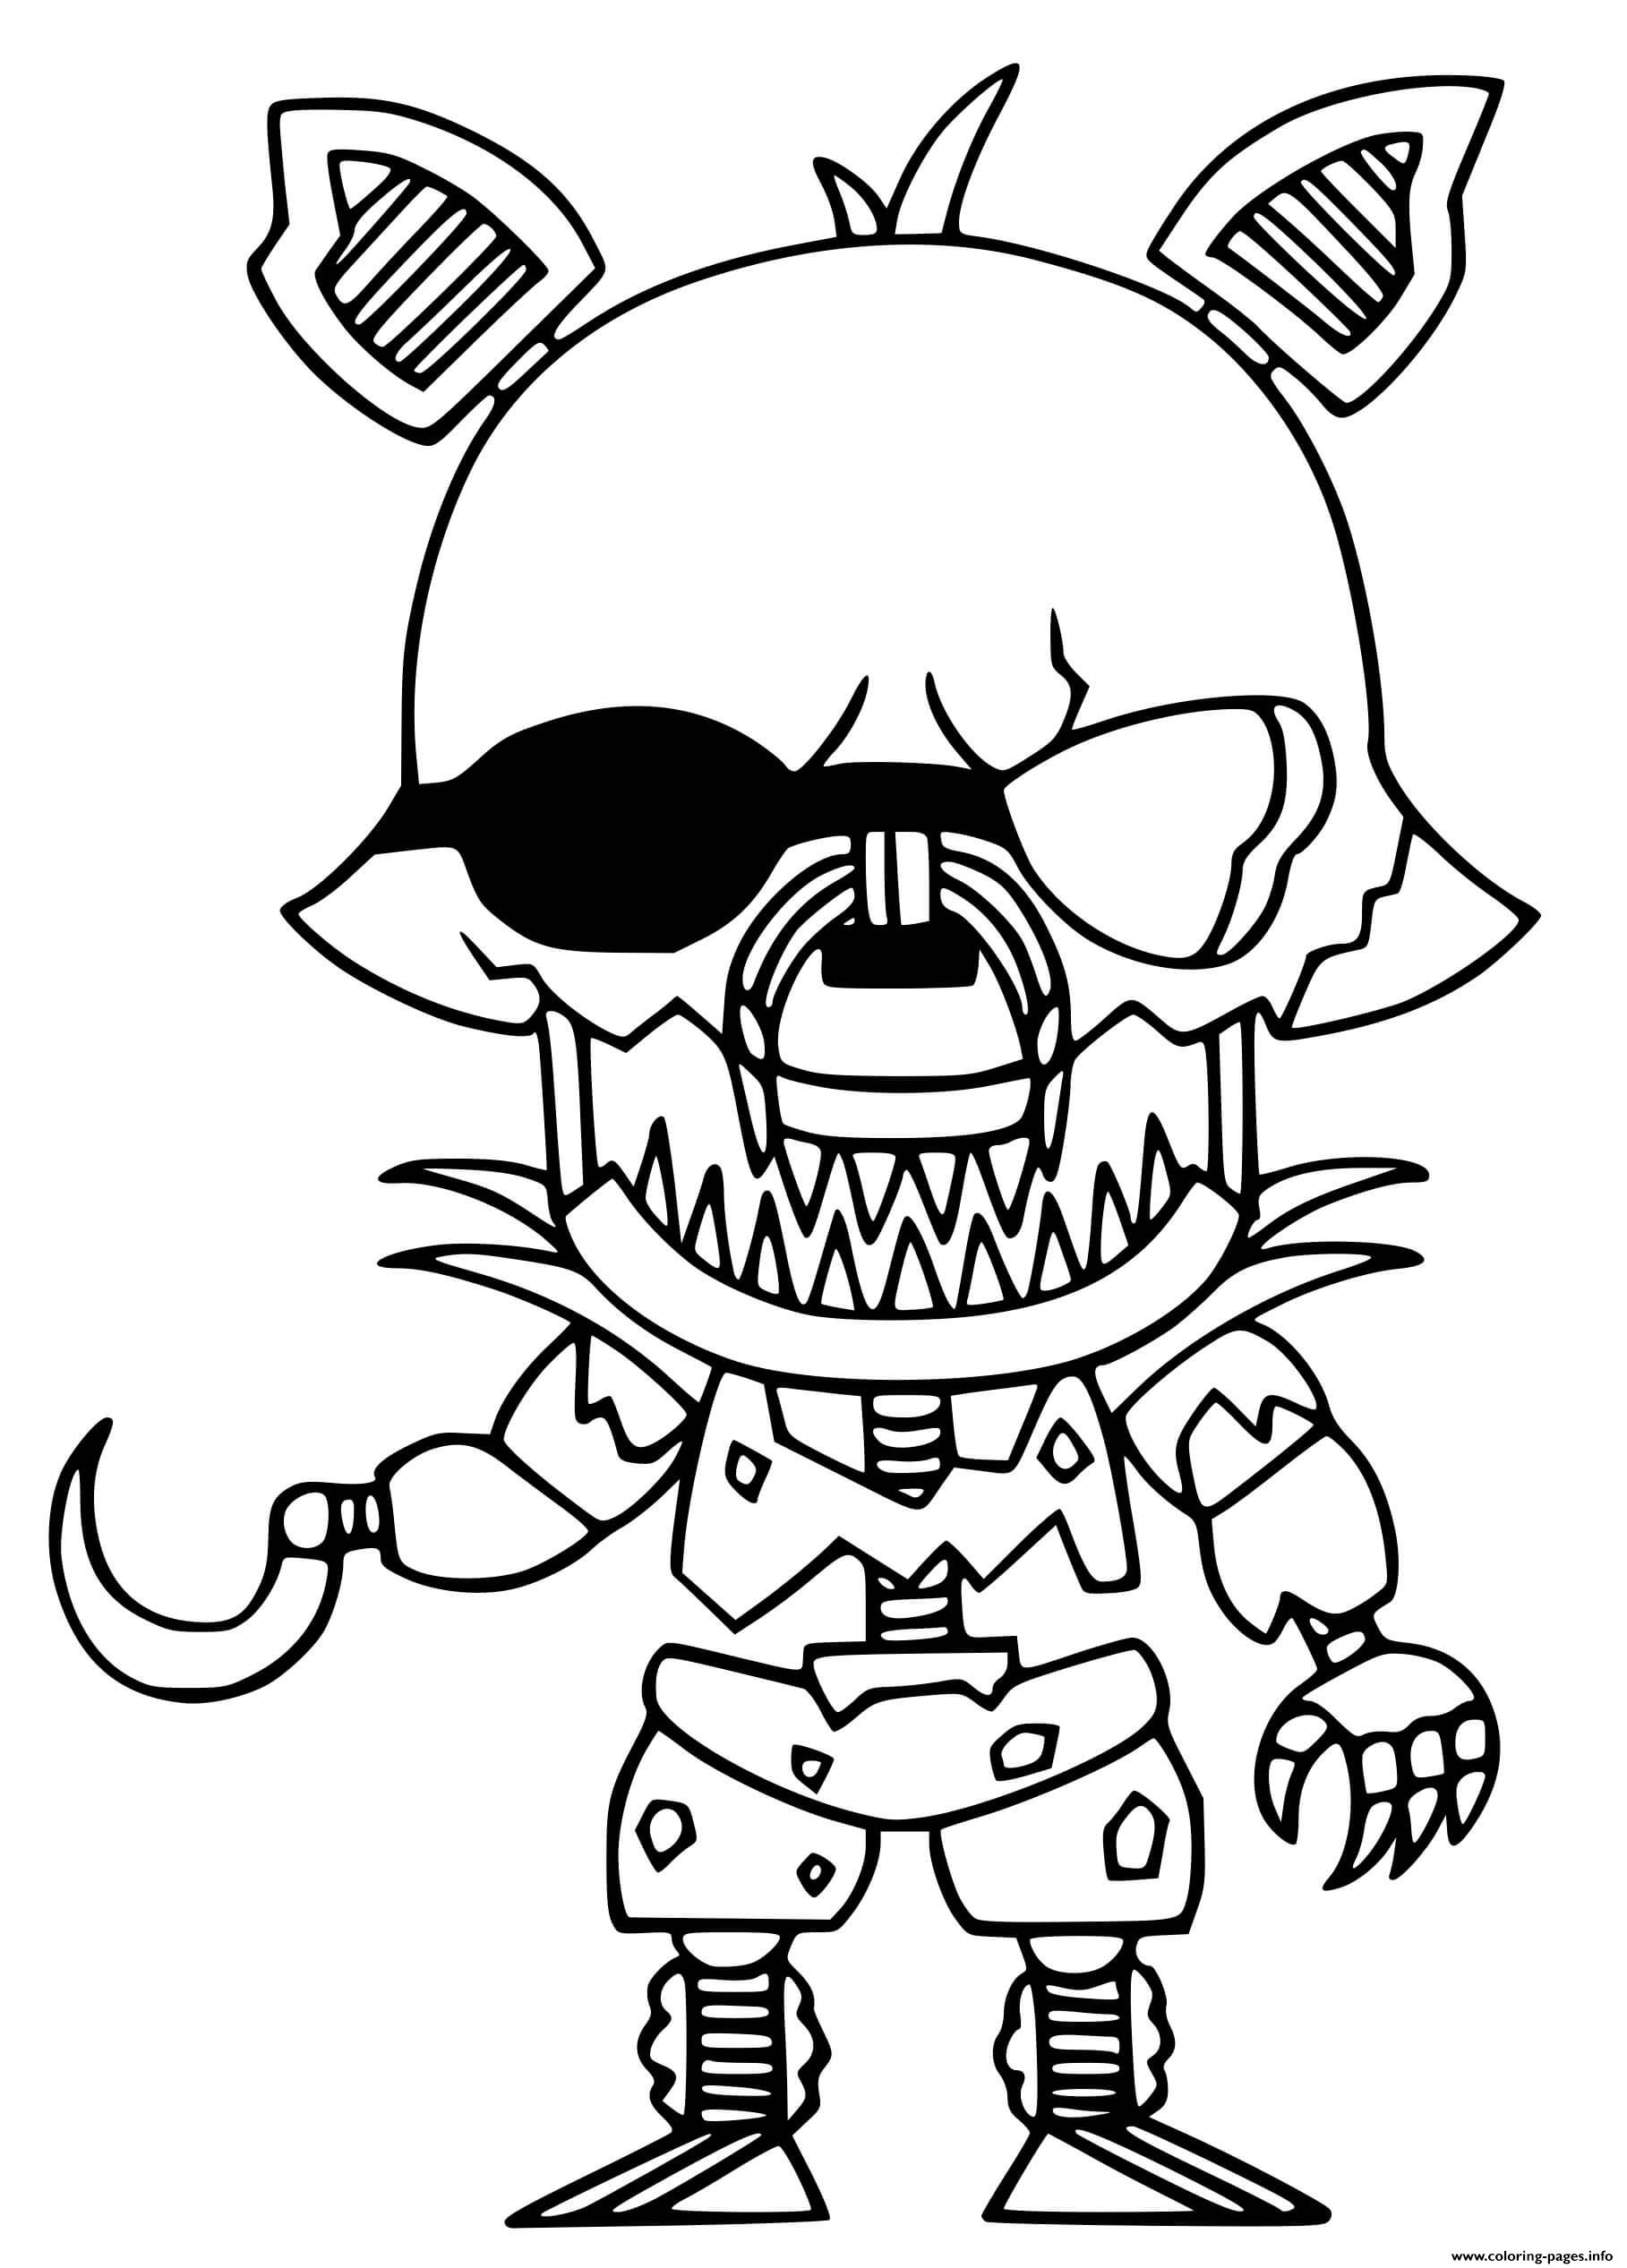 √ Foxy Coloring Pages : Fnaf Foxy Coloring Page Free Printable Coloring